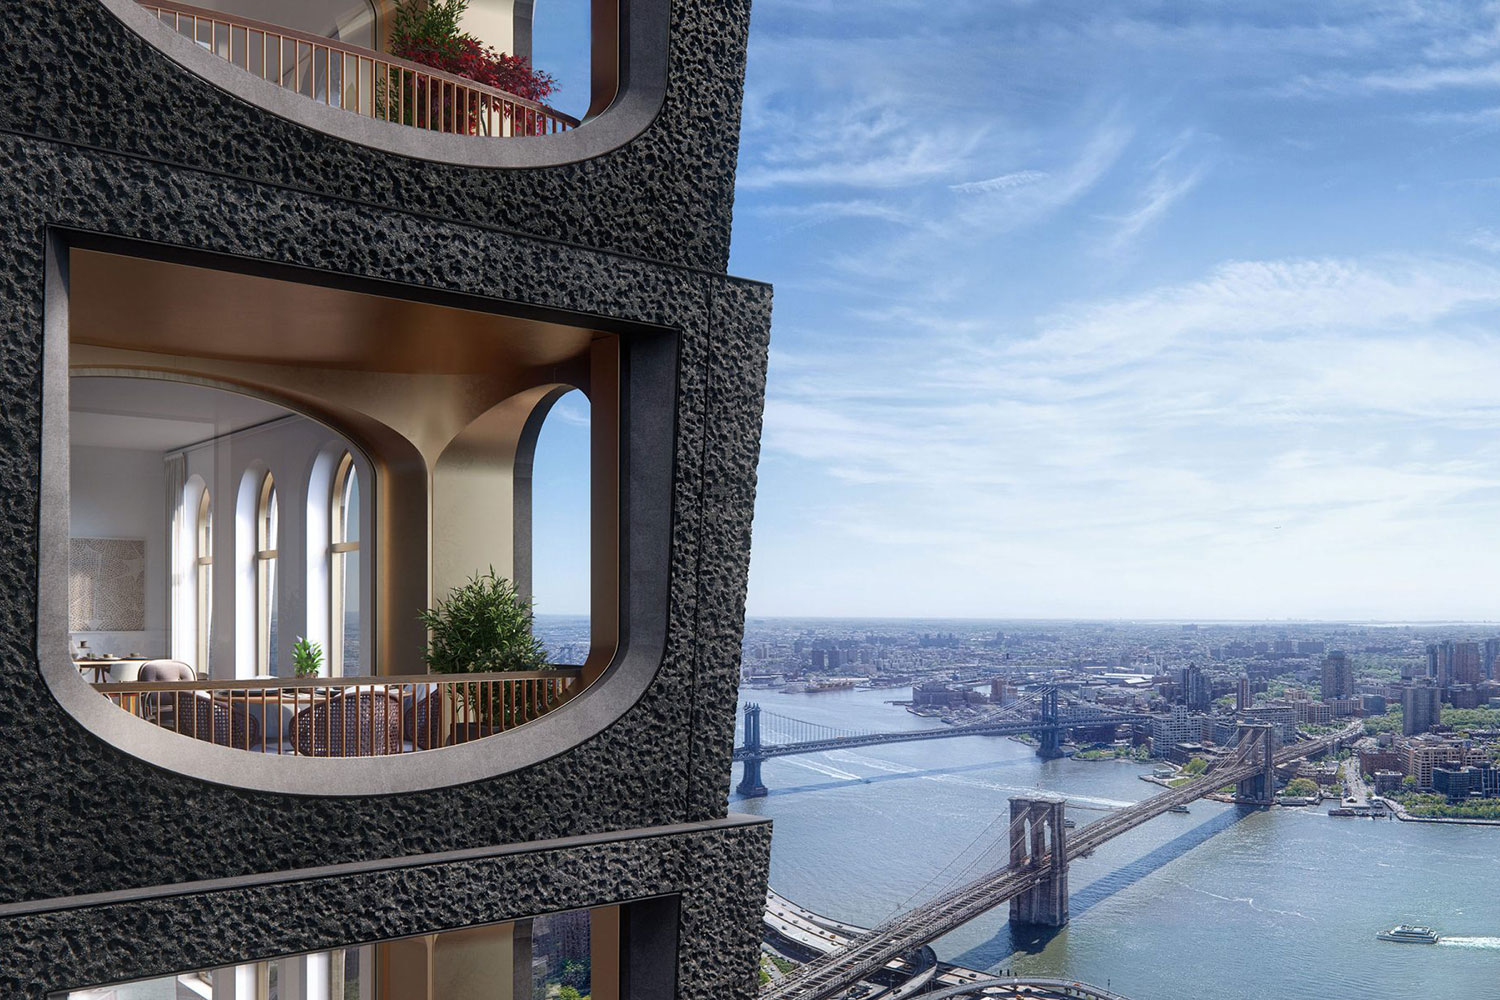 A rendering of 130 William by Adjaye Associates, showing the loggia windows overlooking Brooklyn Bridge and the East River